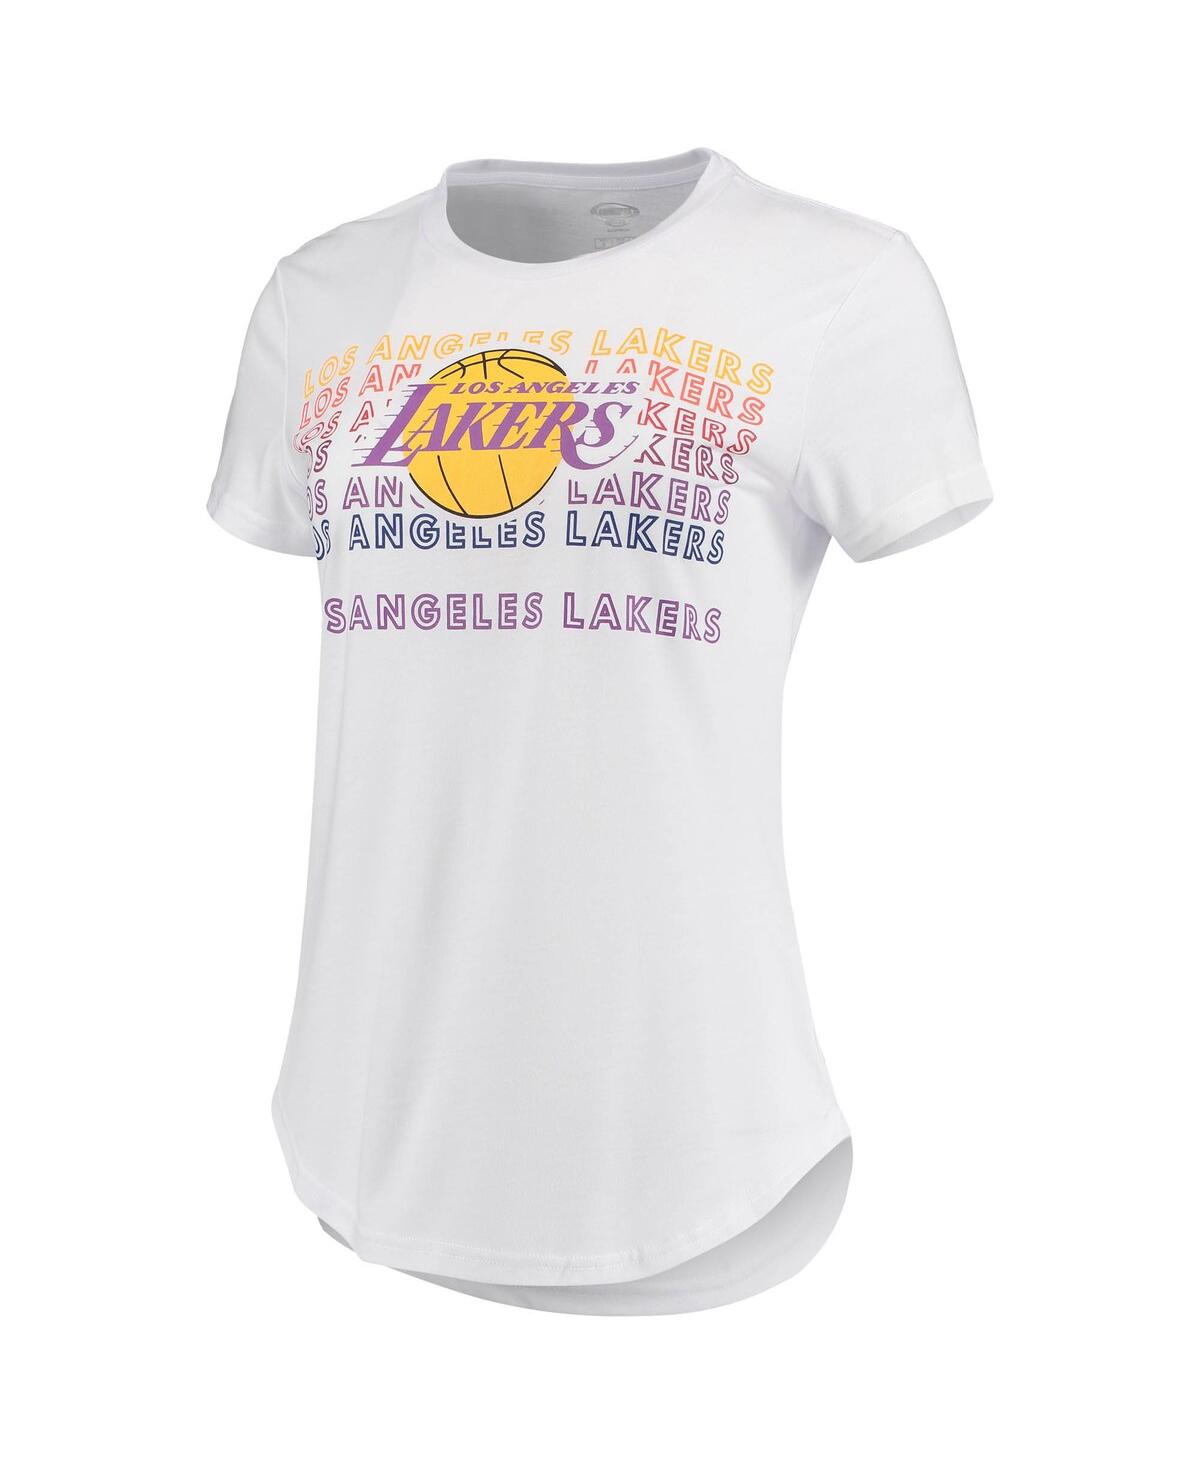 Shop Concepts Sport Women's White, Charcoal Los Angeles Lakers Sonata T-shirt And Leggings Set In White,charcoal